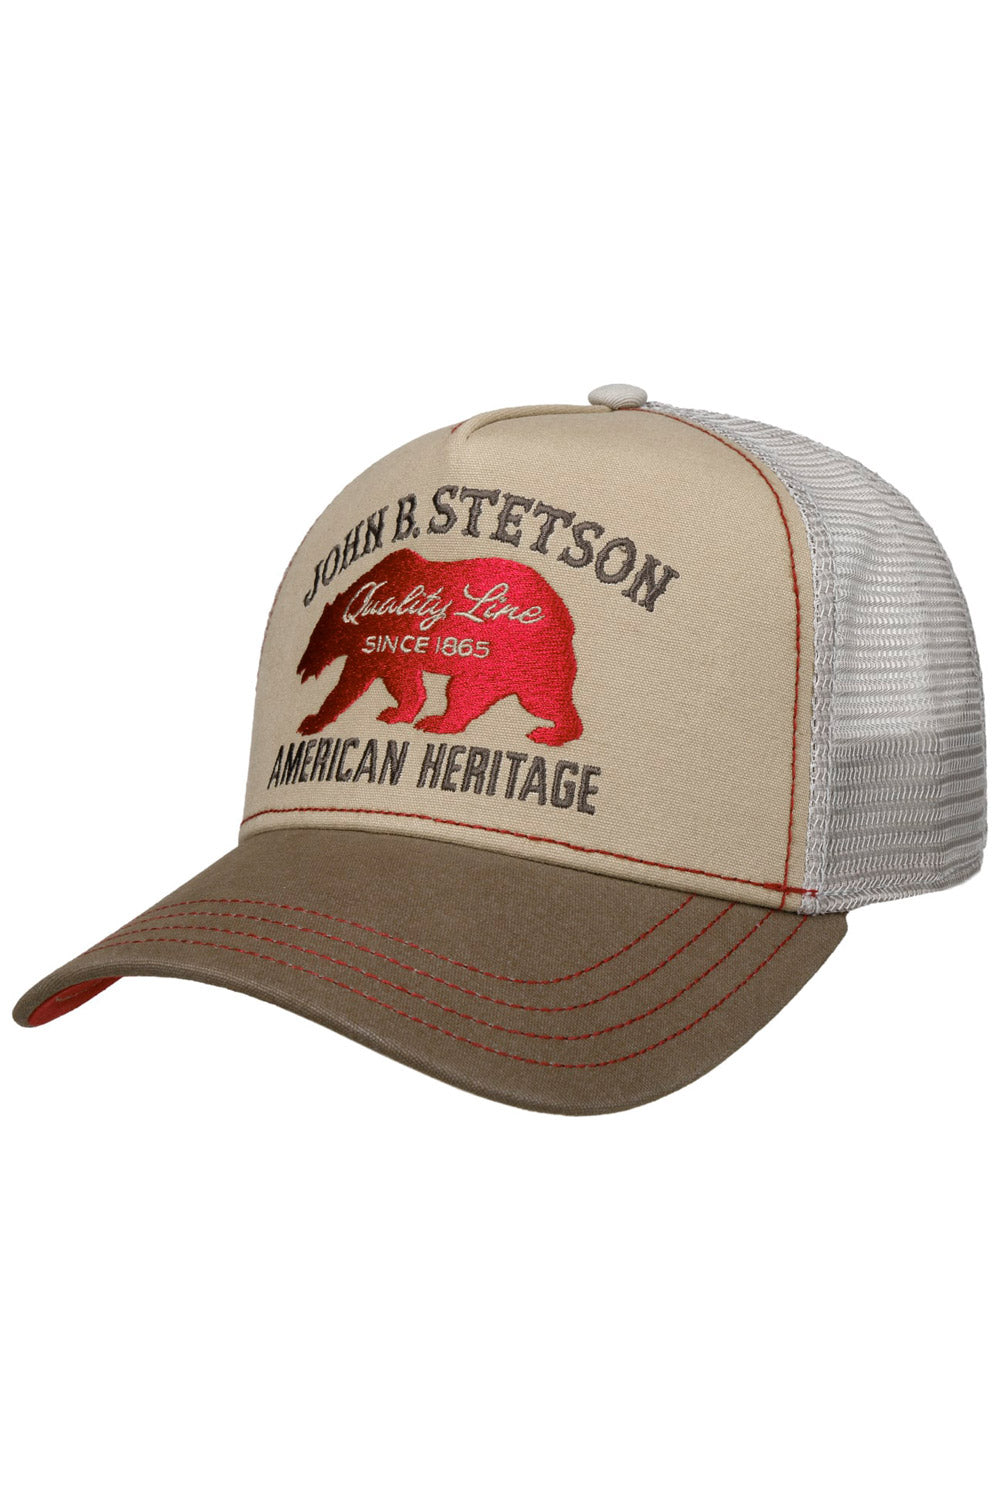 Buy the Stetson JBS-Bear Trucker Cap in Beige/Grey at Intro. Spend £50 for free UK delivery. Official stockists. We ship worldwide.